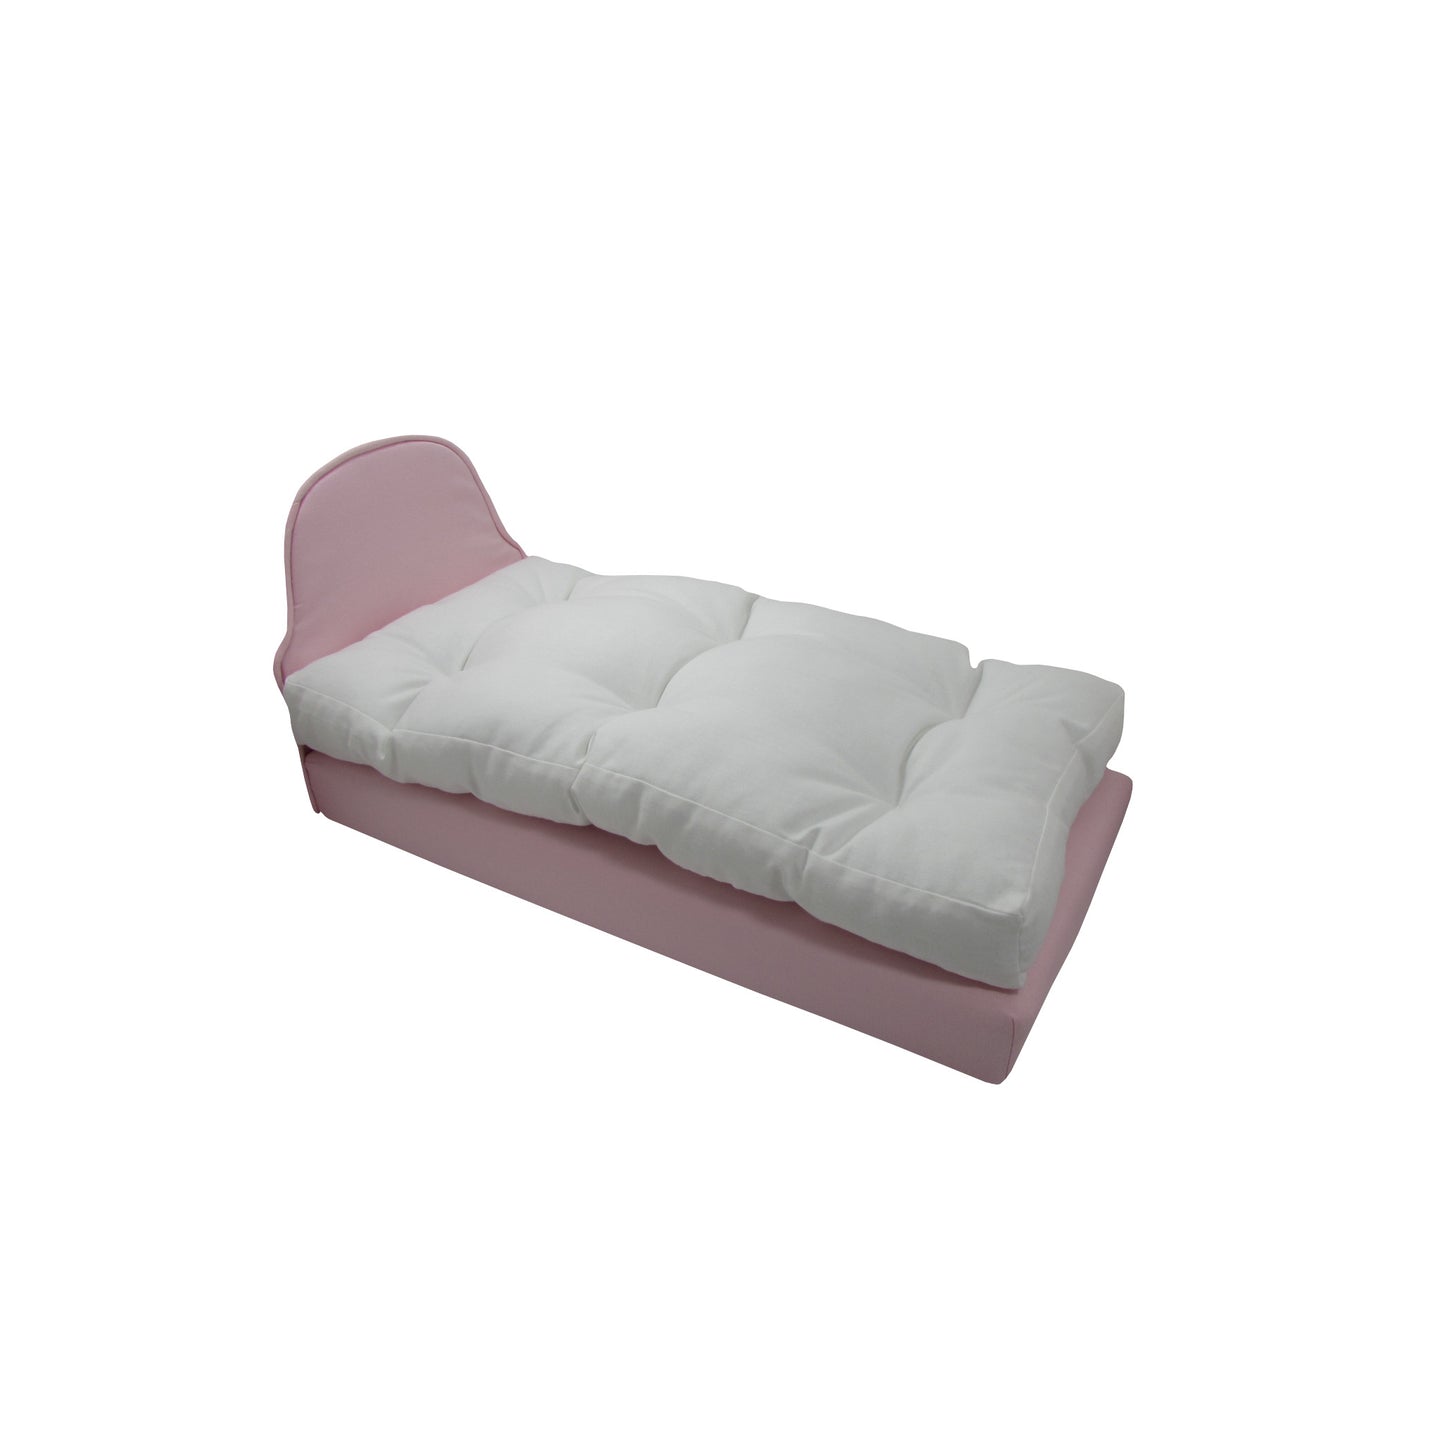 Upholstered Light Pink Doll Bed for 14.5-inch dolls